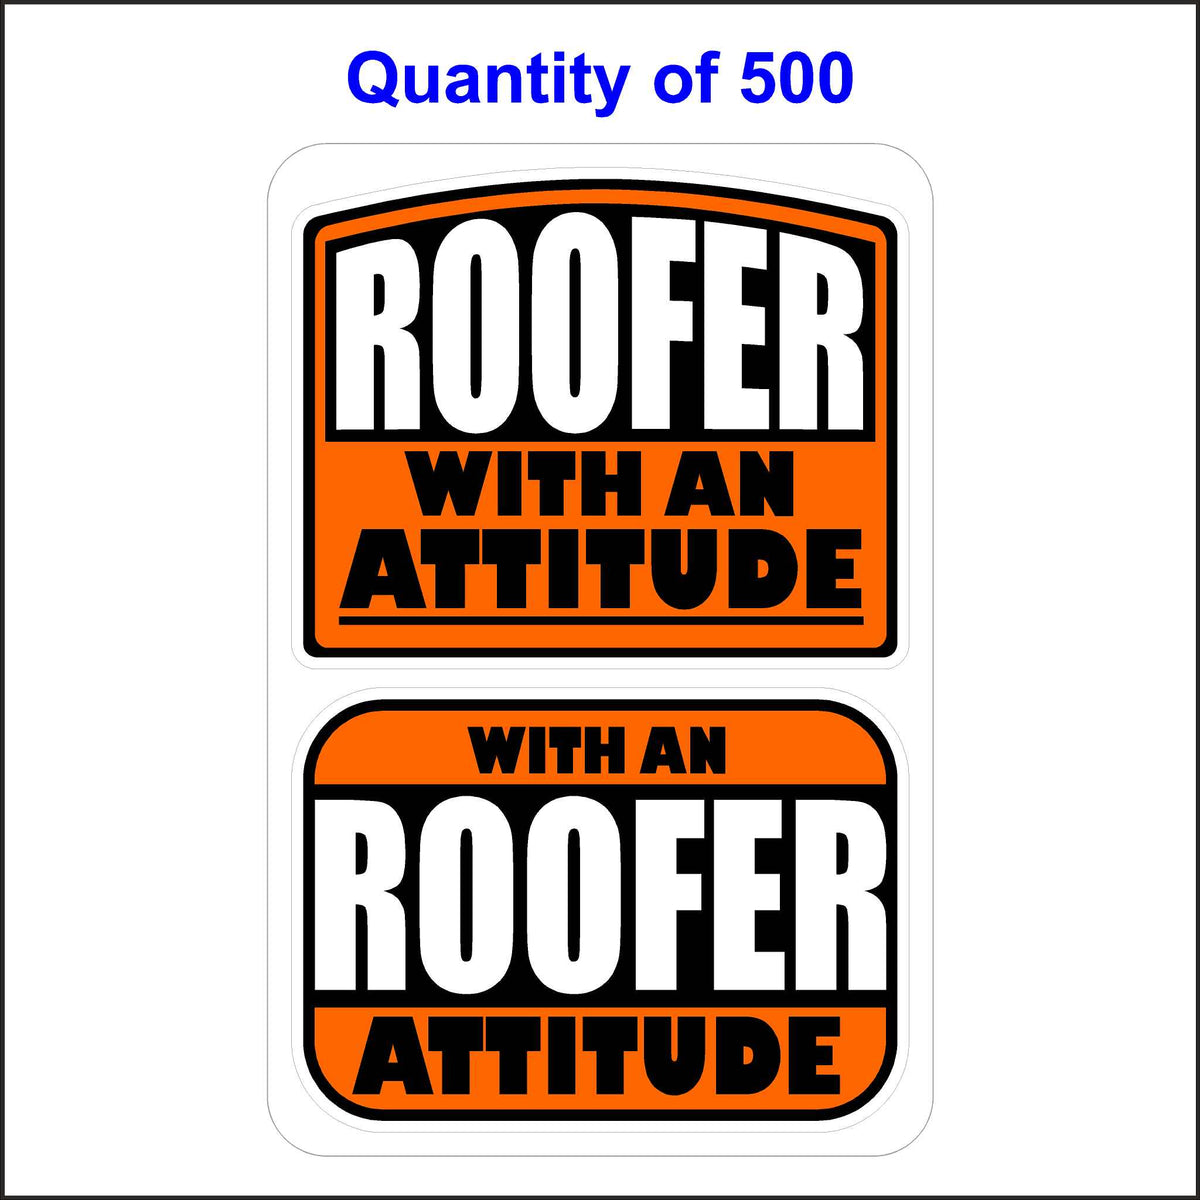 Roofer With An Attitude Stickers 500 Quantity.